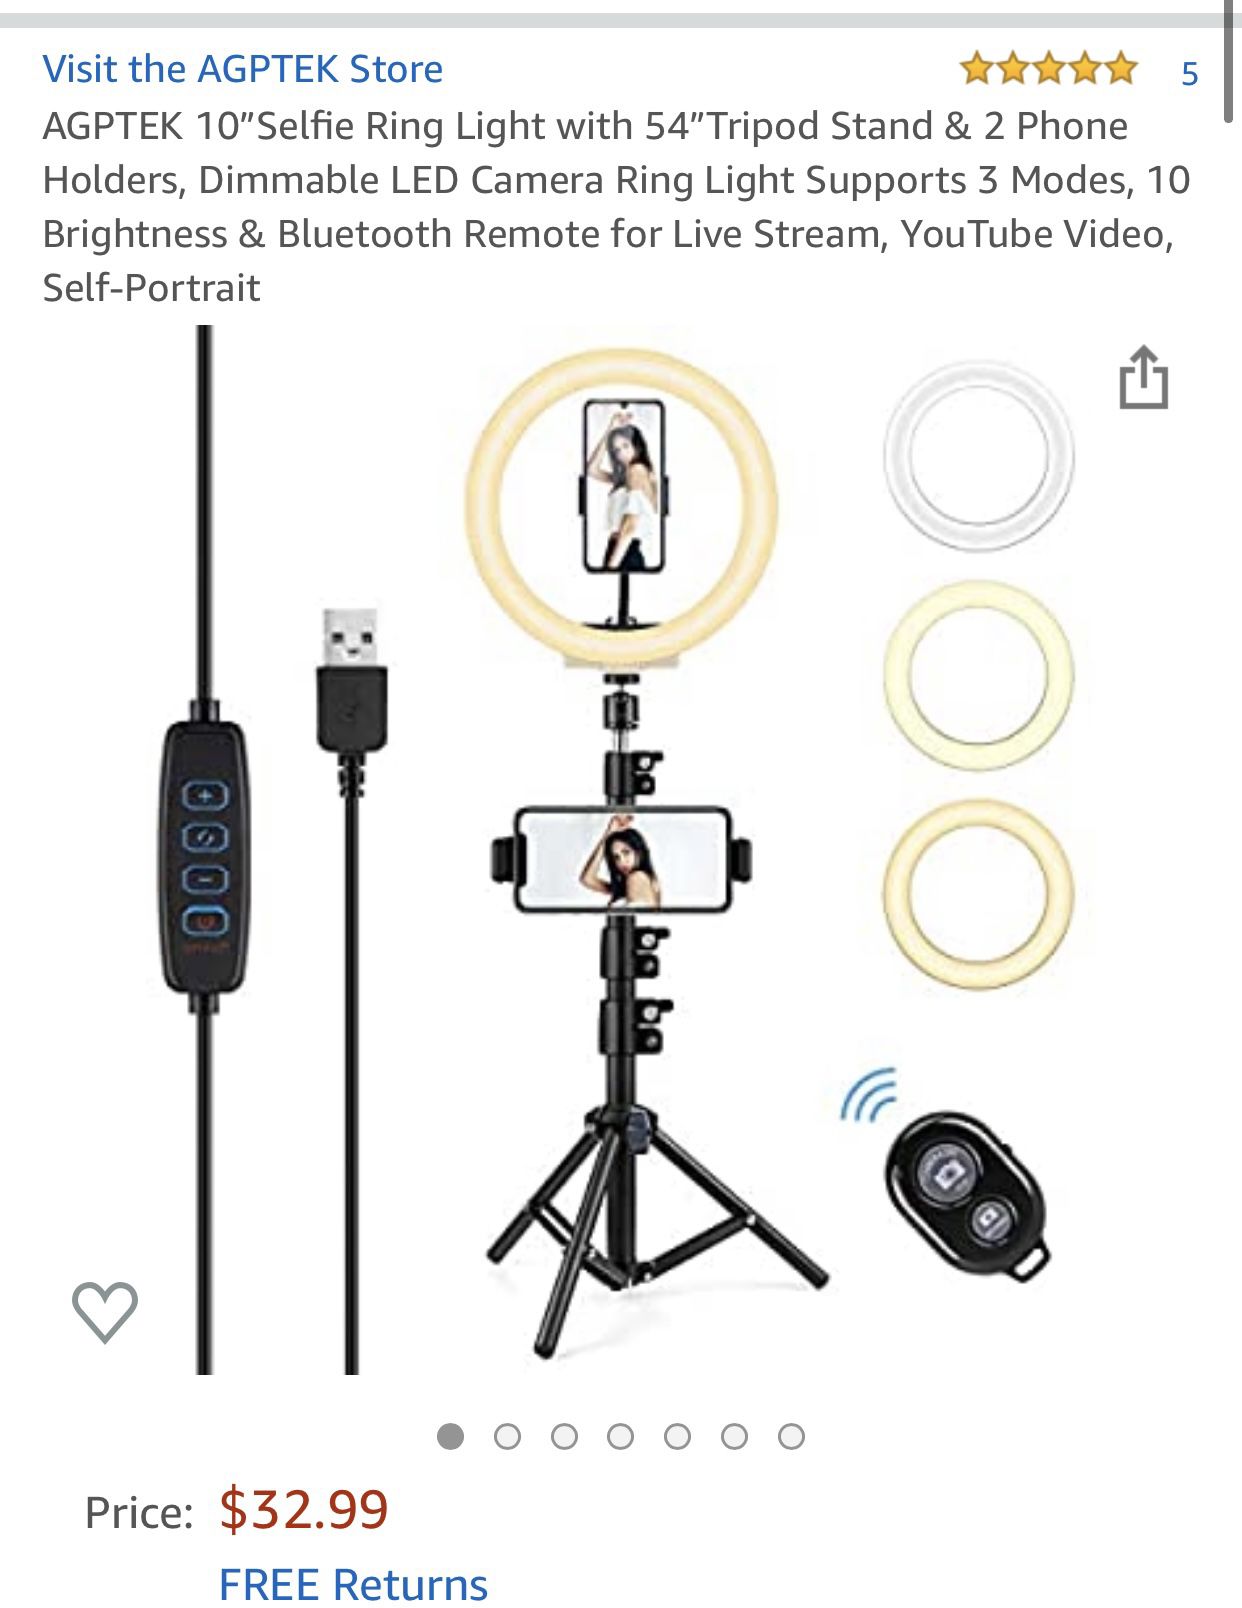 10”Selfie Ring Light with 54”Tripod Stand & 2 Phone Holders